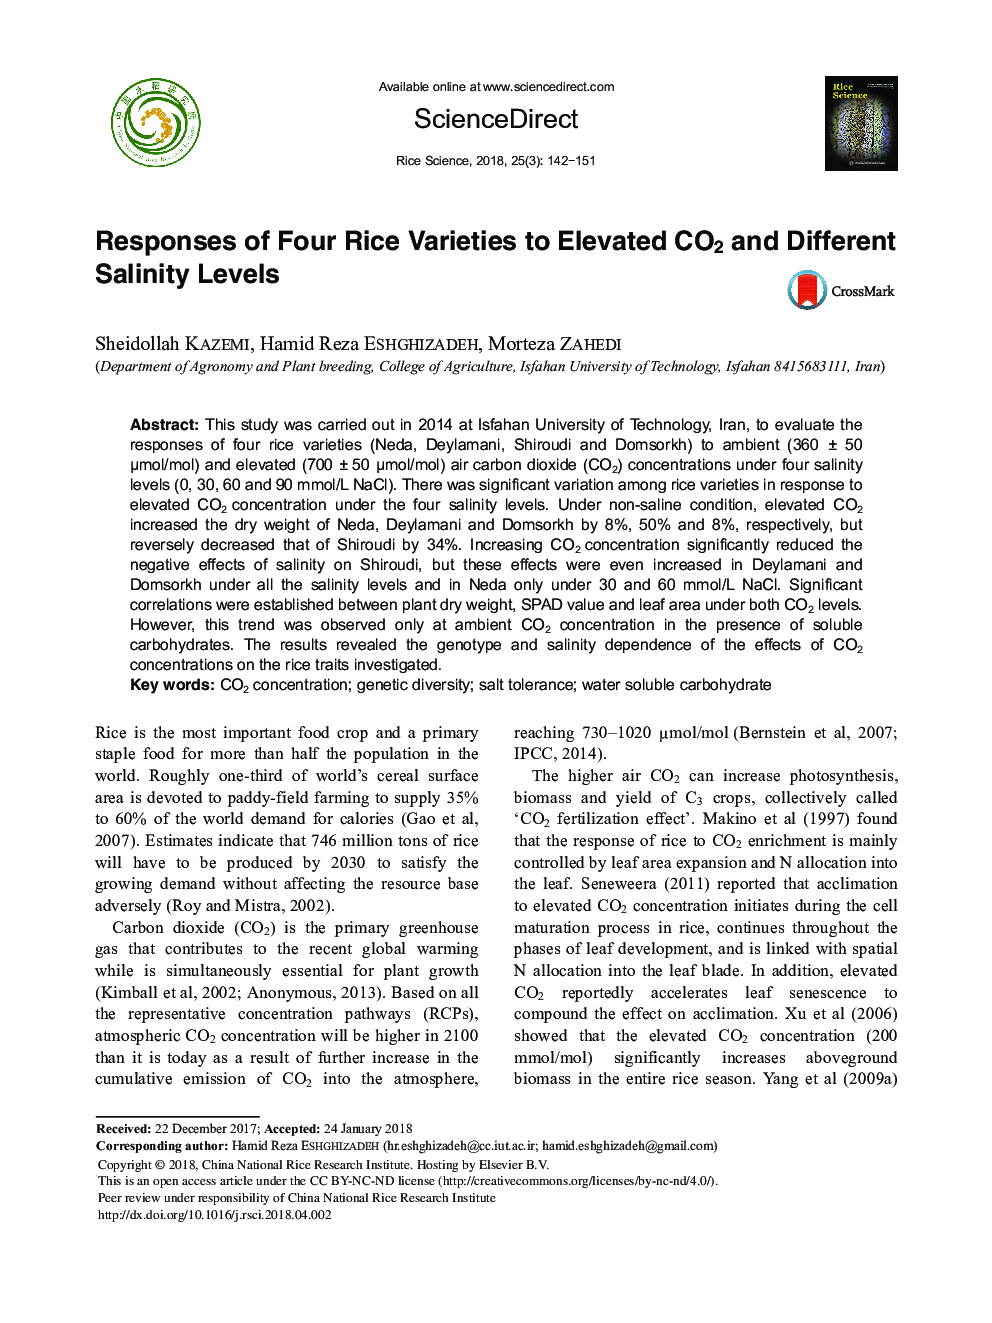 Responses of Four Rice Varieties to Elevated CO2 and Different Salinity Levels